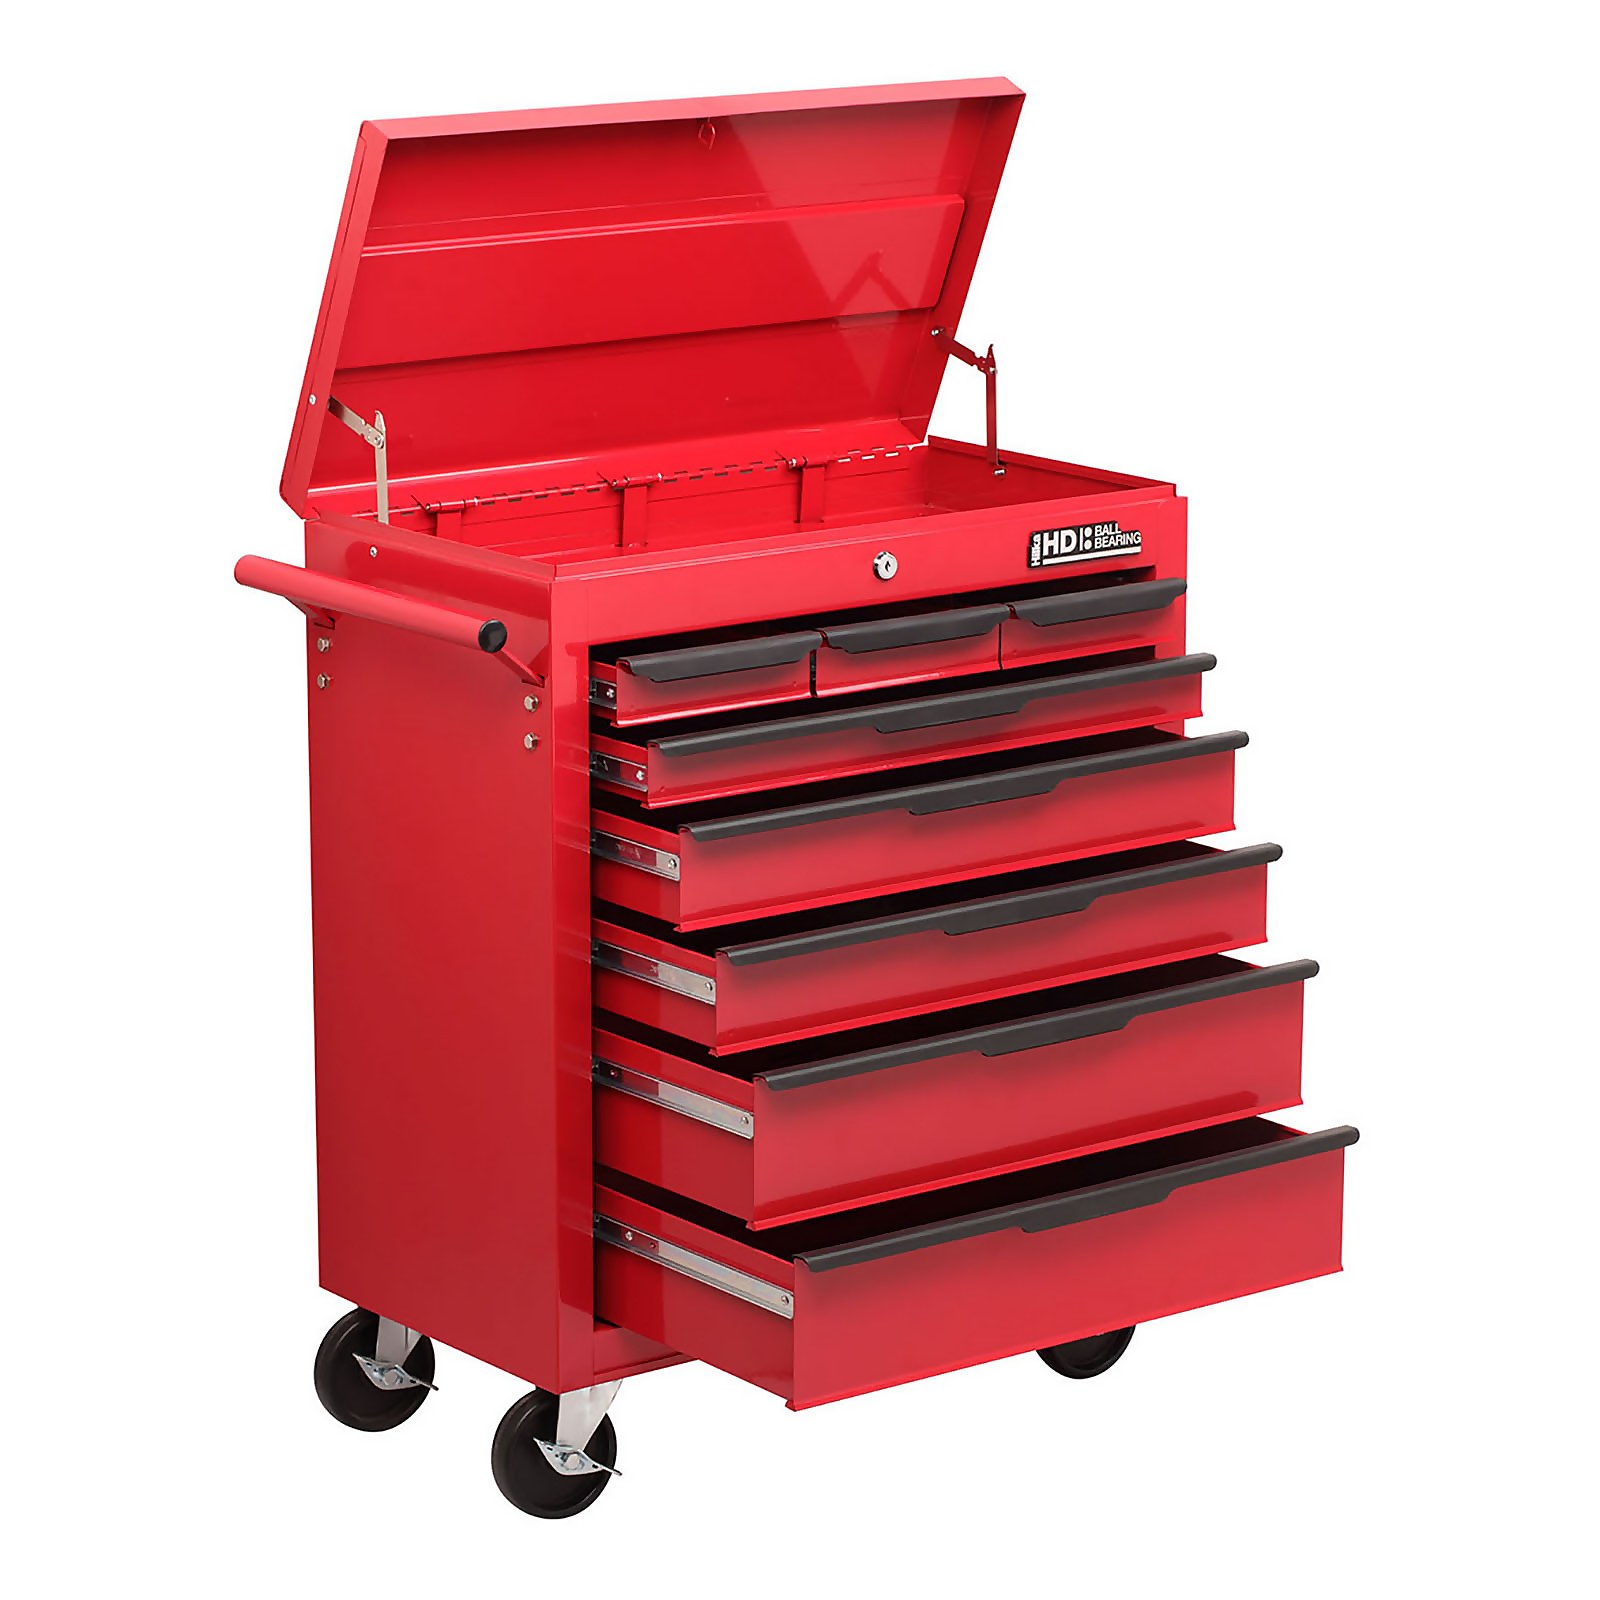 Photo of Hilka Heavy Duty 8 Drawer Tool Storage Trolley With Lid Storage And Ball Bearing Slides